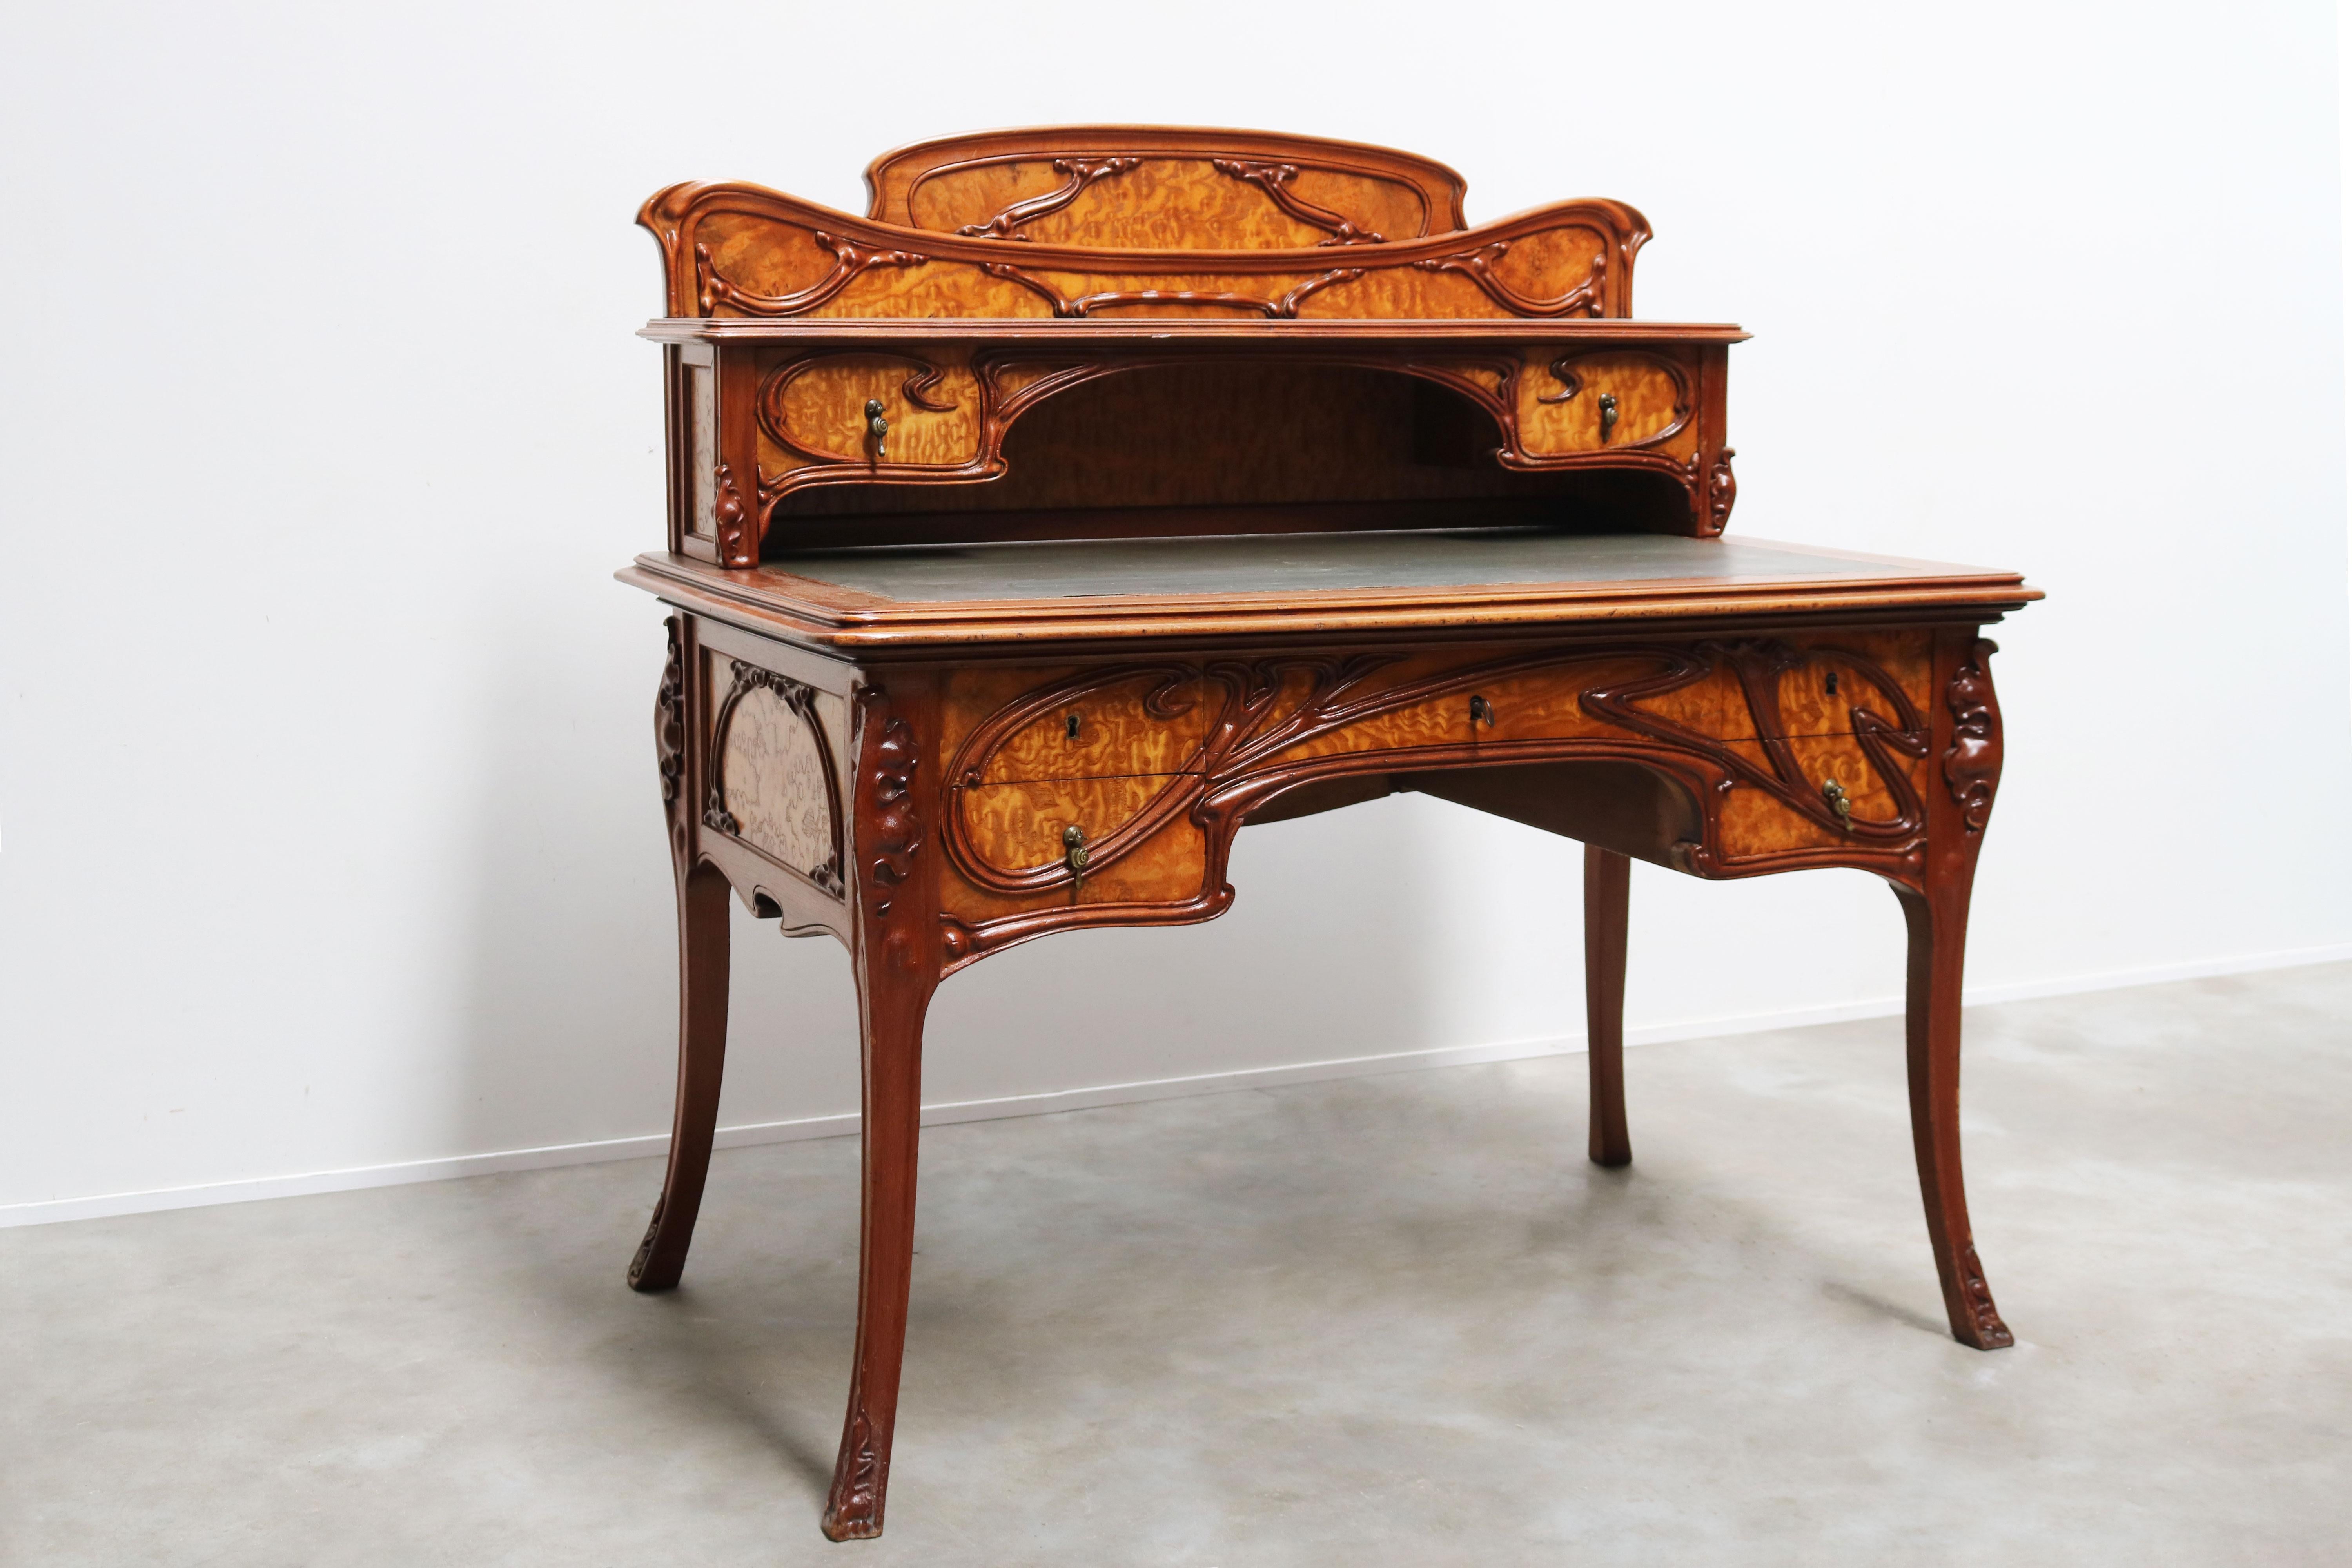 Simply exquisite antique French writing desk in the Art Nouveau design style made in 1895. 
A marvelous combination between Walnut & Japanese ash wood. The typical organic lines & floral decoration fitting for the art nouveau movement. One very